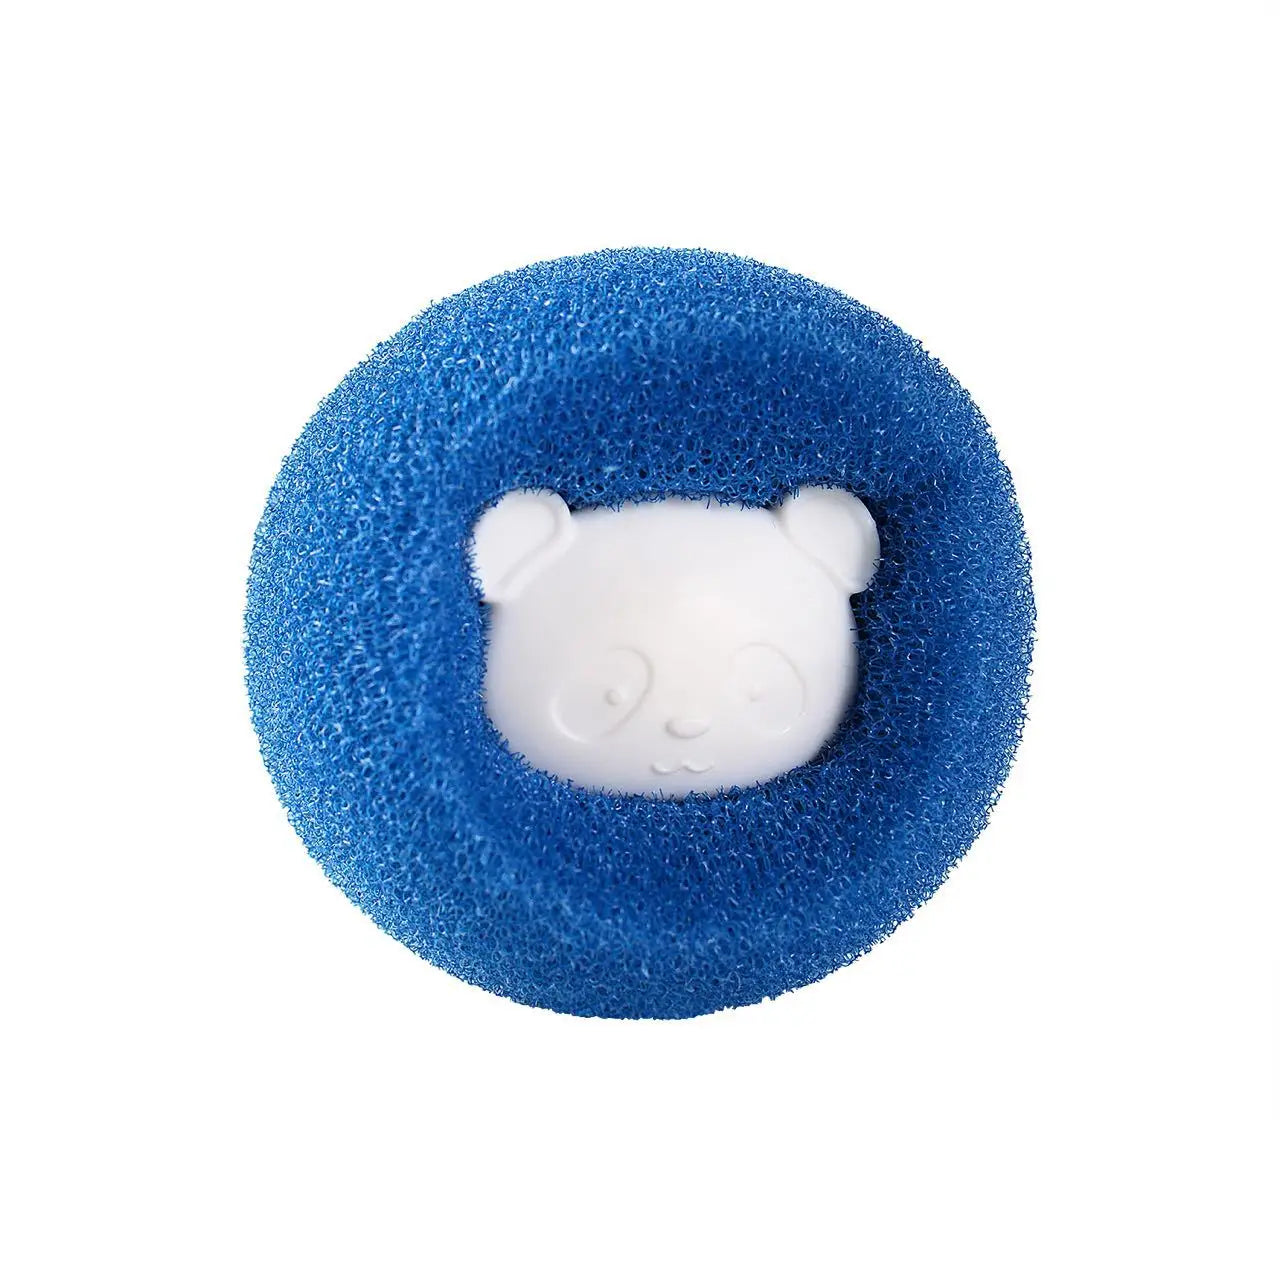 Pet Hair Remover Reusable Ball Wool Sticker Cat Hair Remover Pet Fur Lint Catcher Cleaning Tools Laundry Washing Machine Filter